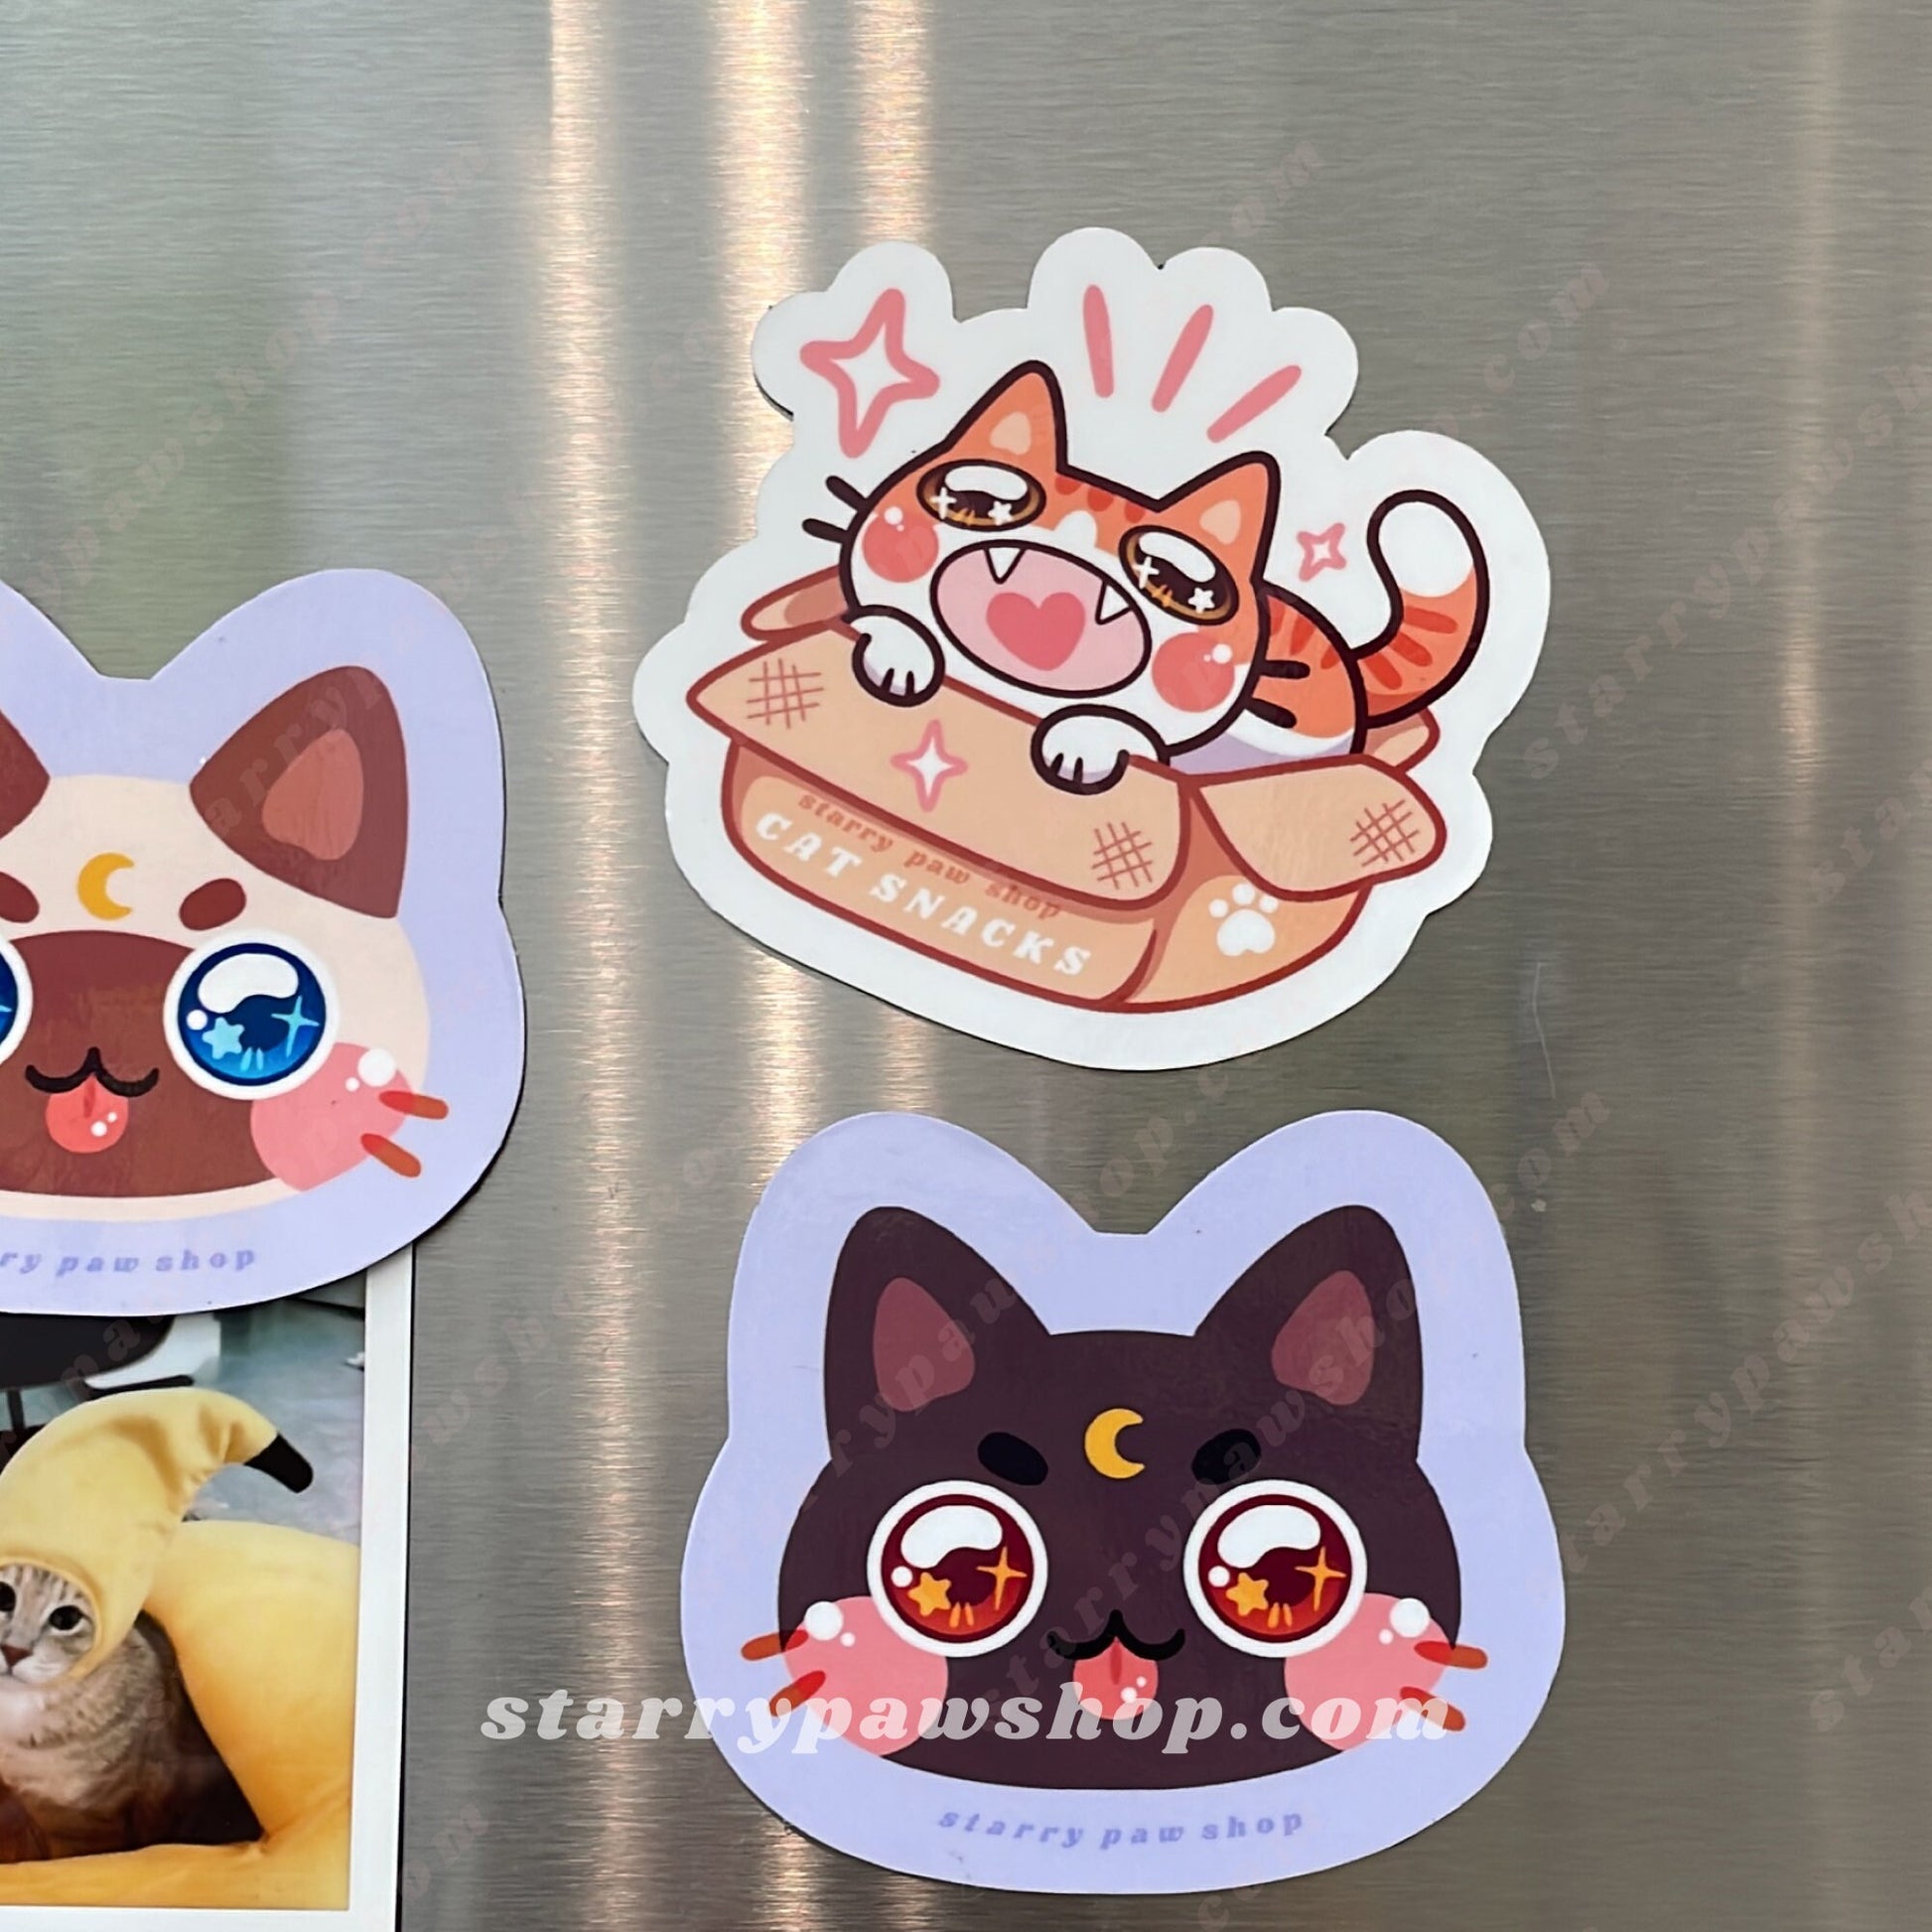 Cute Cat in a Box magnet | 31 Cat Colors with heart meow | Waterproof Glossy Cat Fridge Magnets for indoor & whiteboards